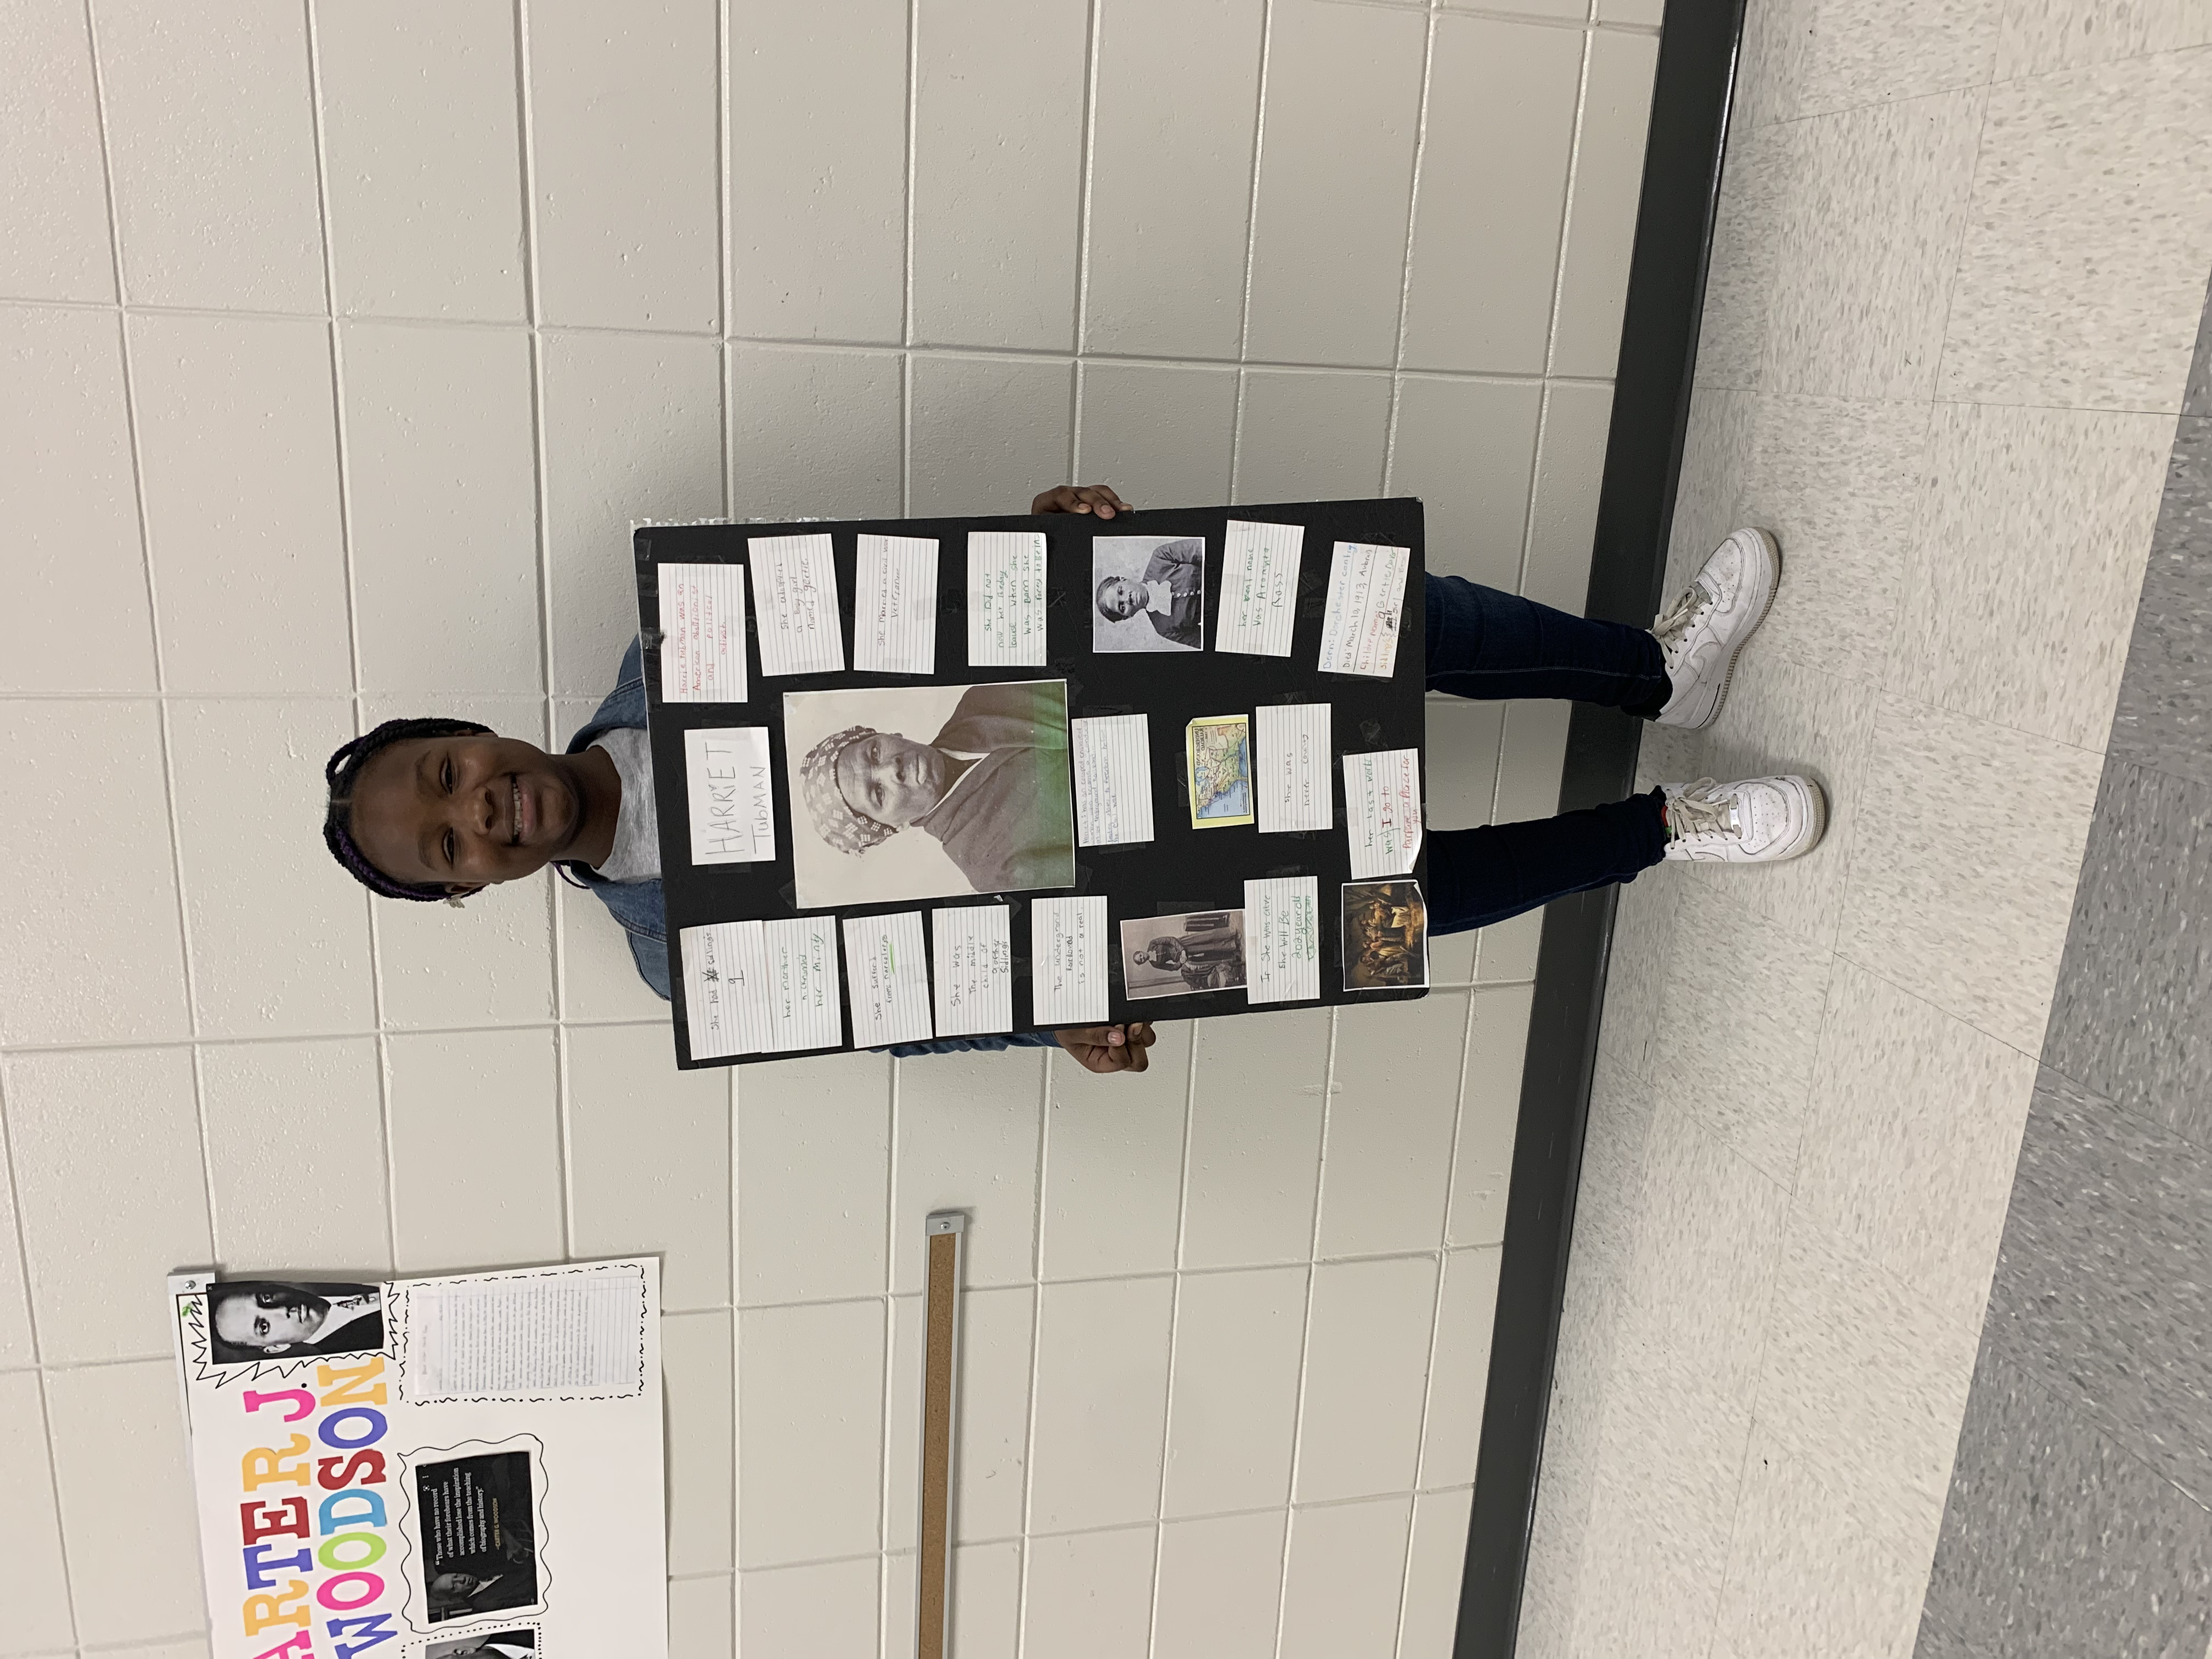 Black History month projects